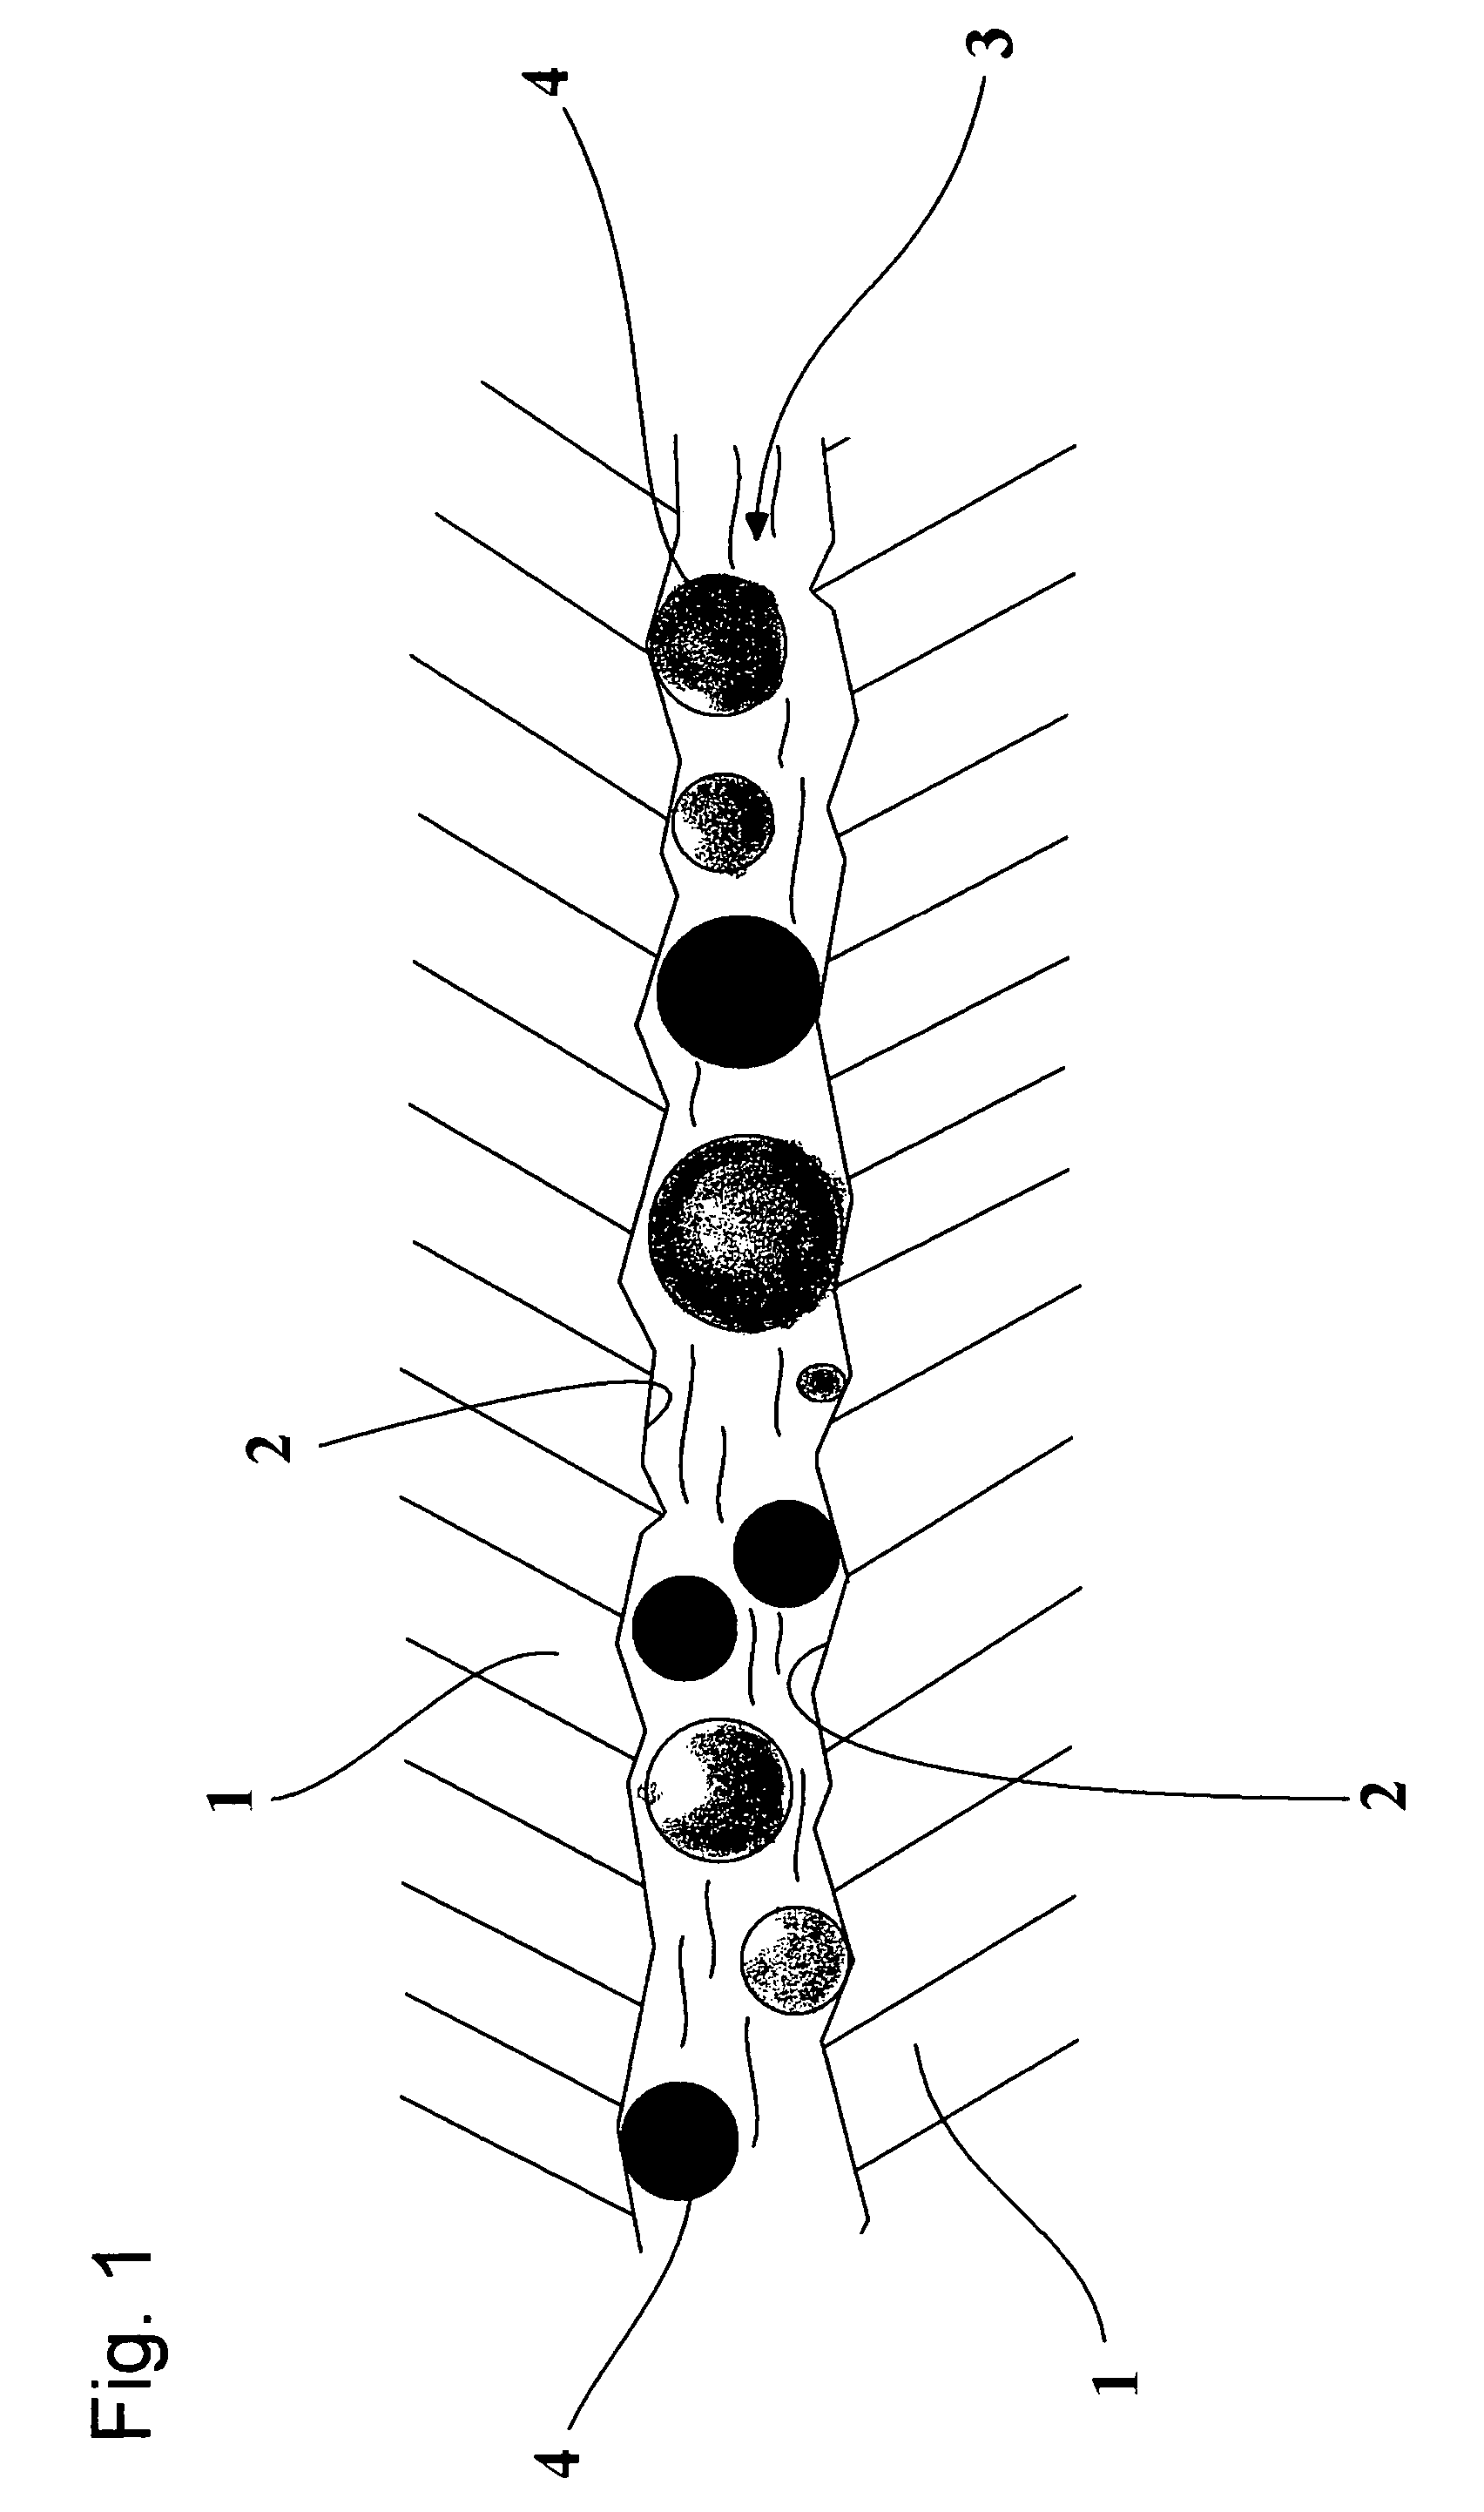 Suppressing method of wear in friction system between two objects